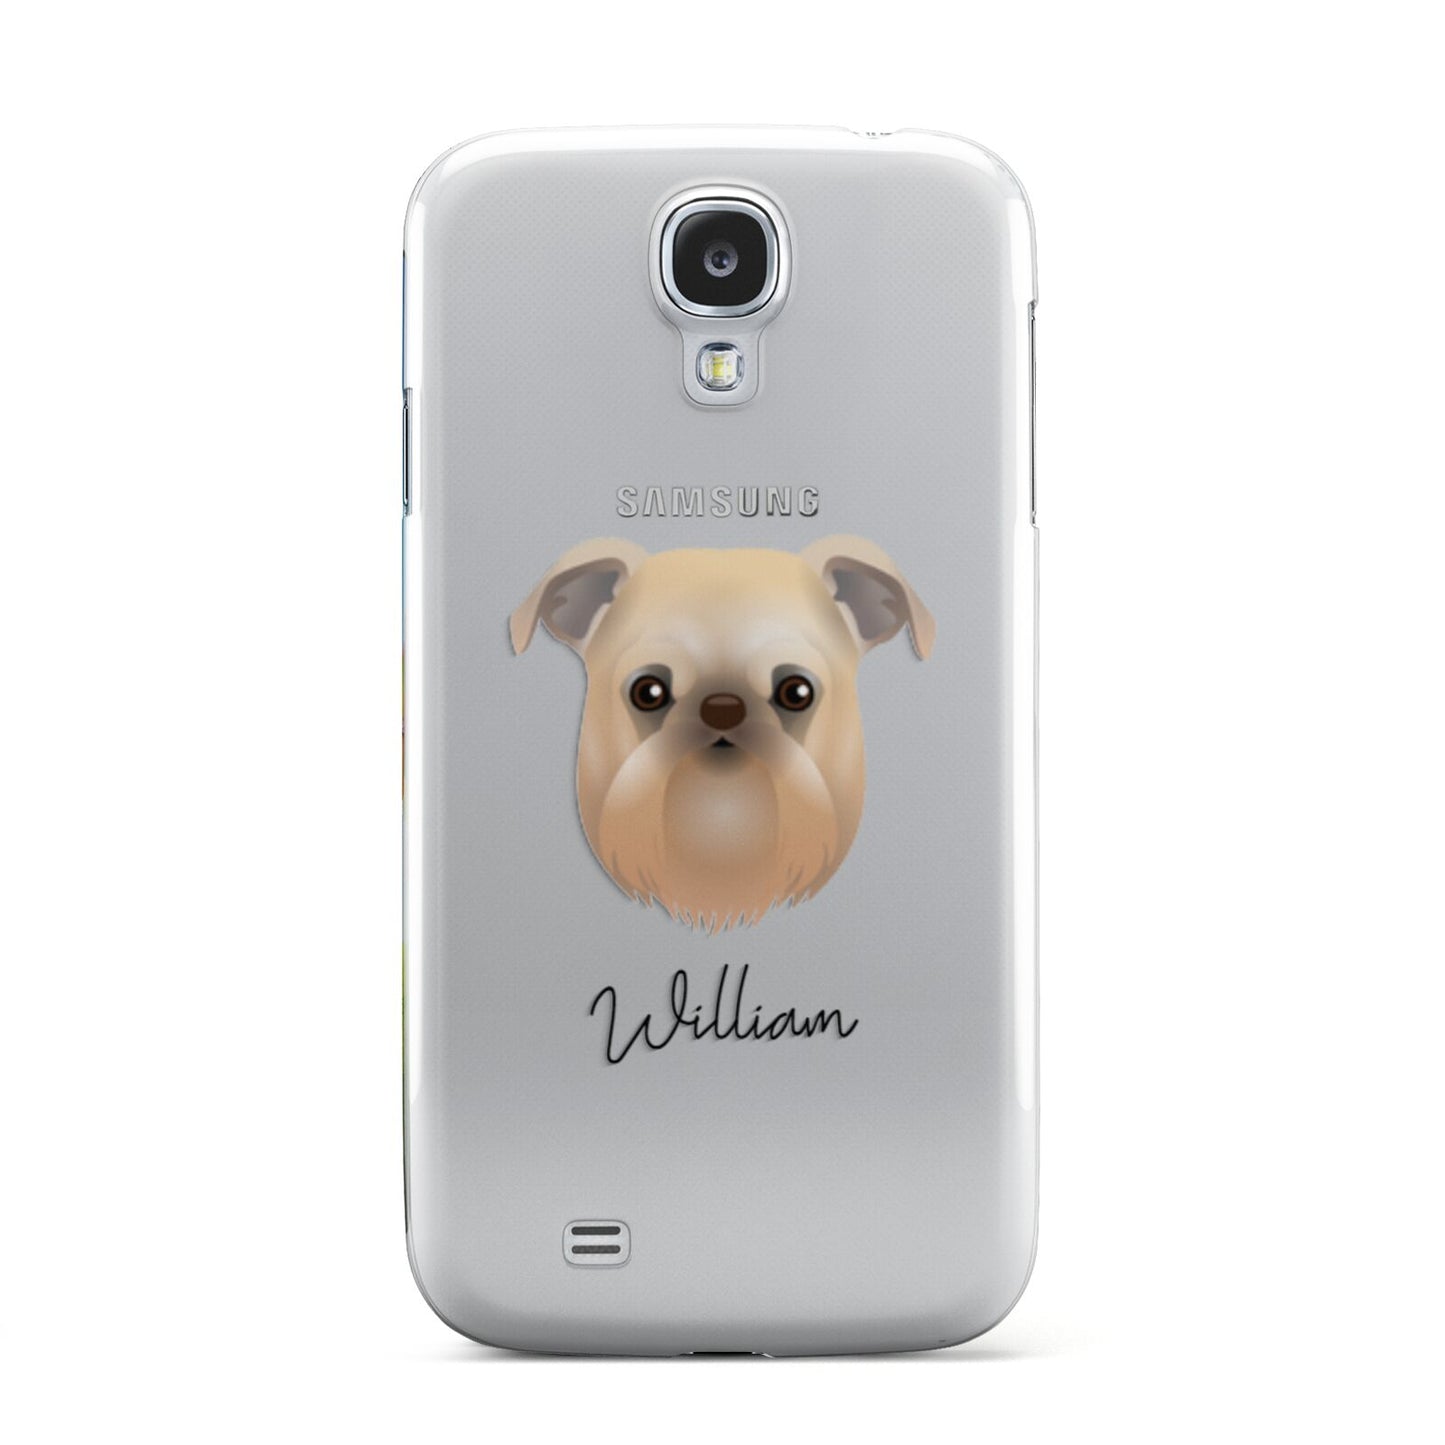 Griffon Bruxellois Personalised Samsung Galaxy S4 Case